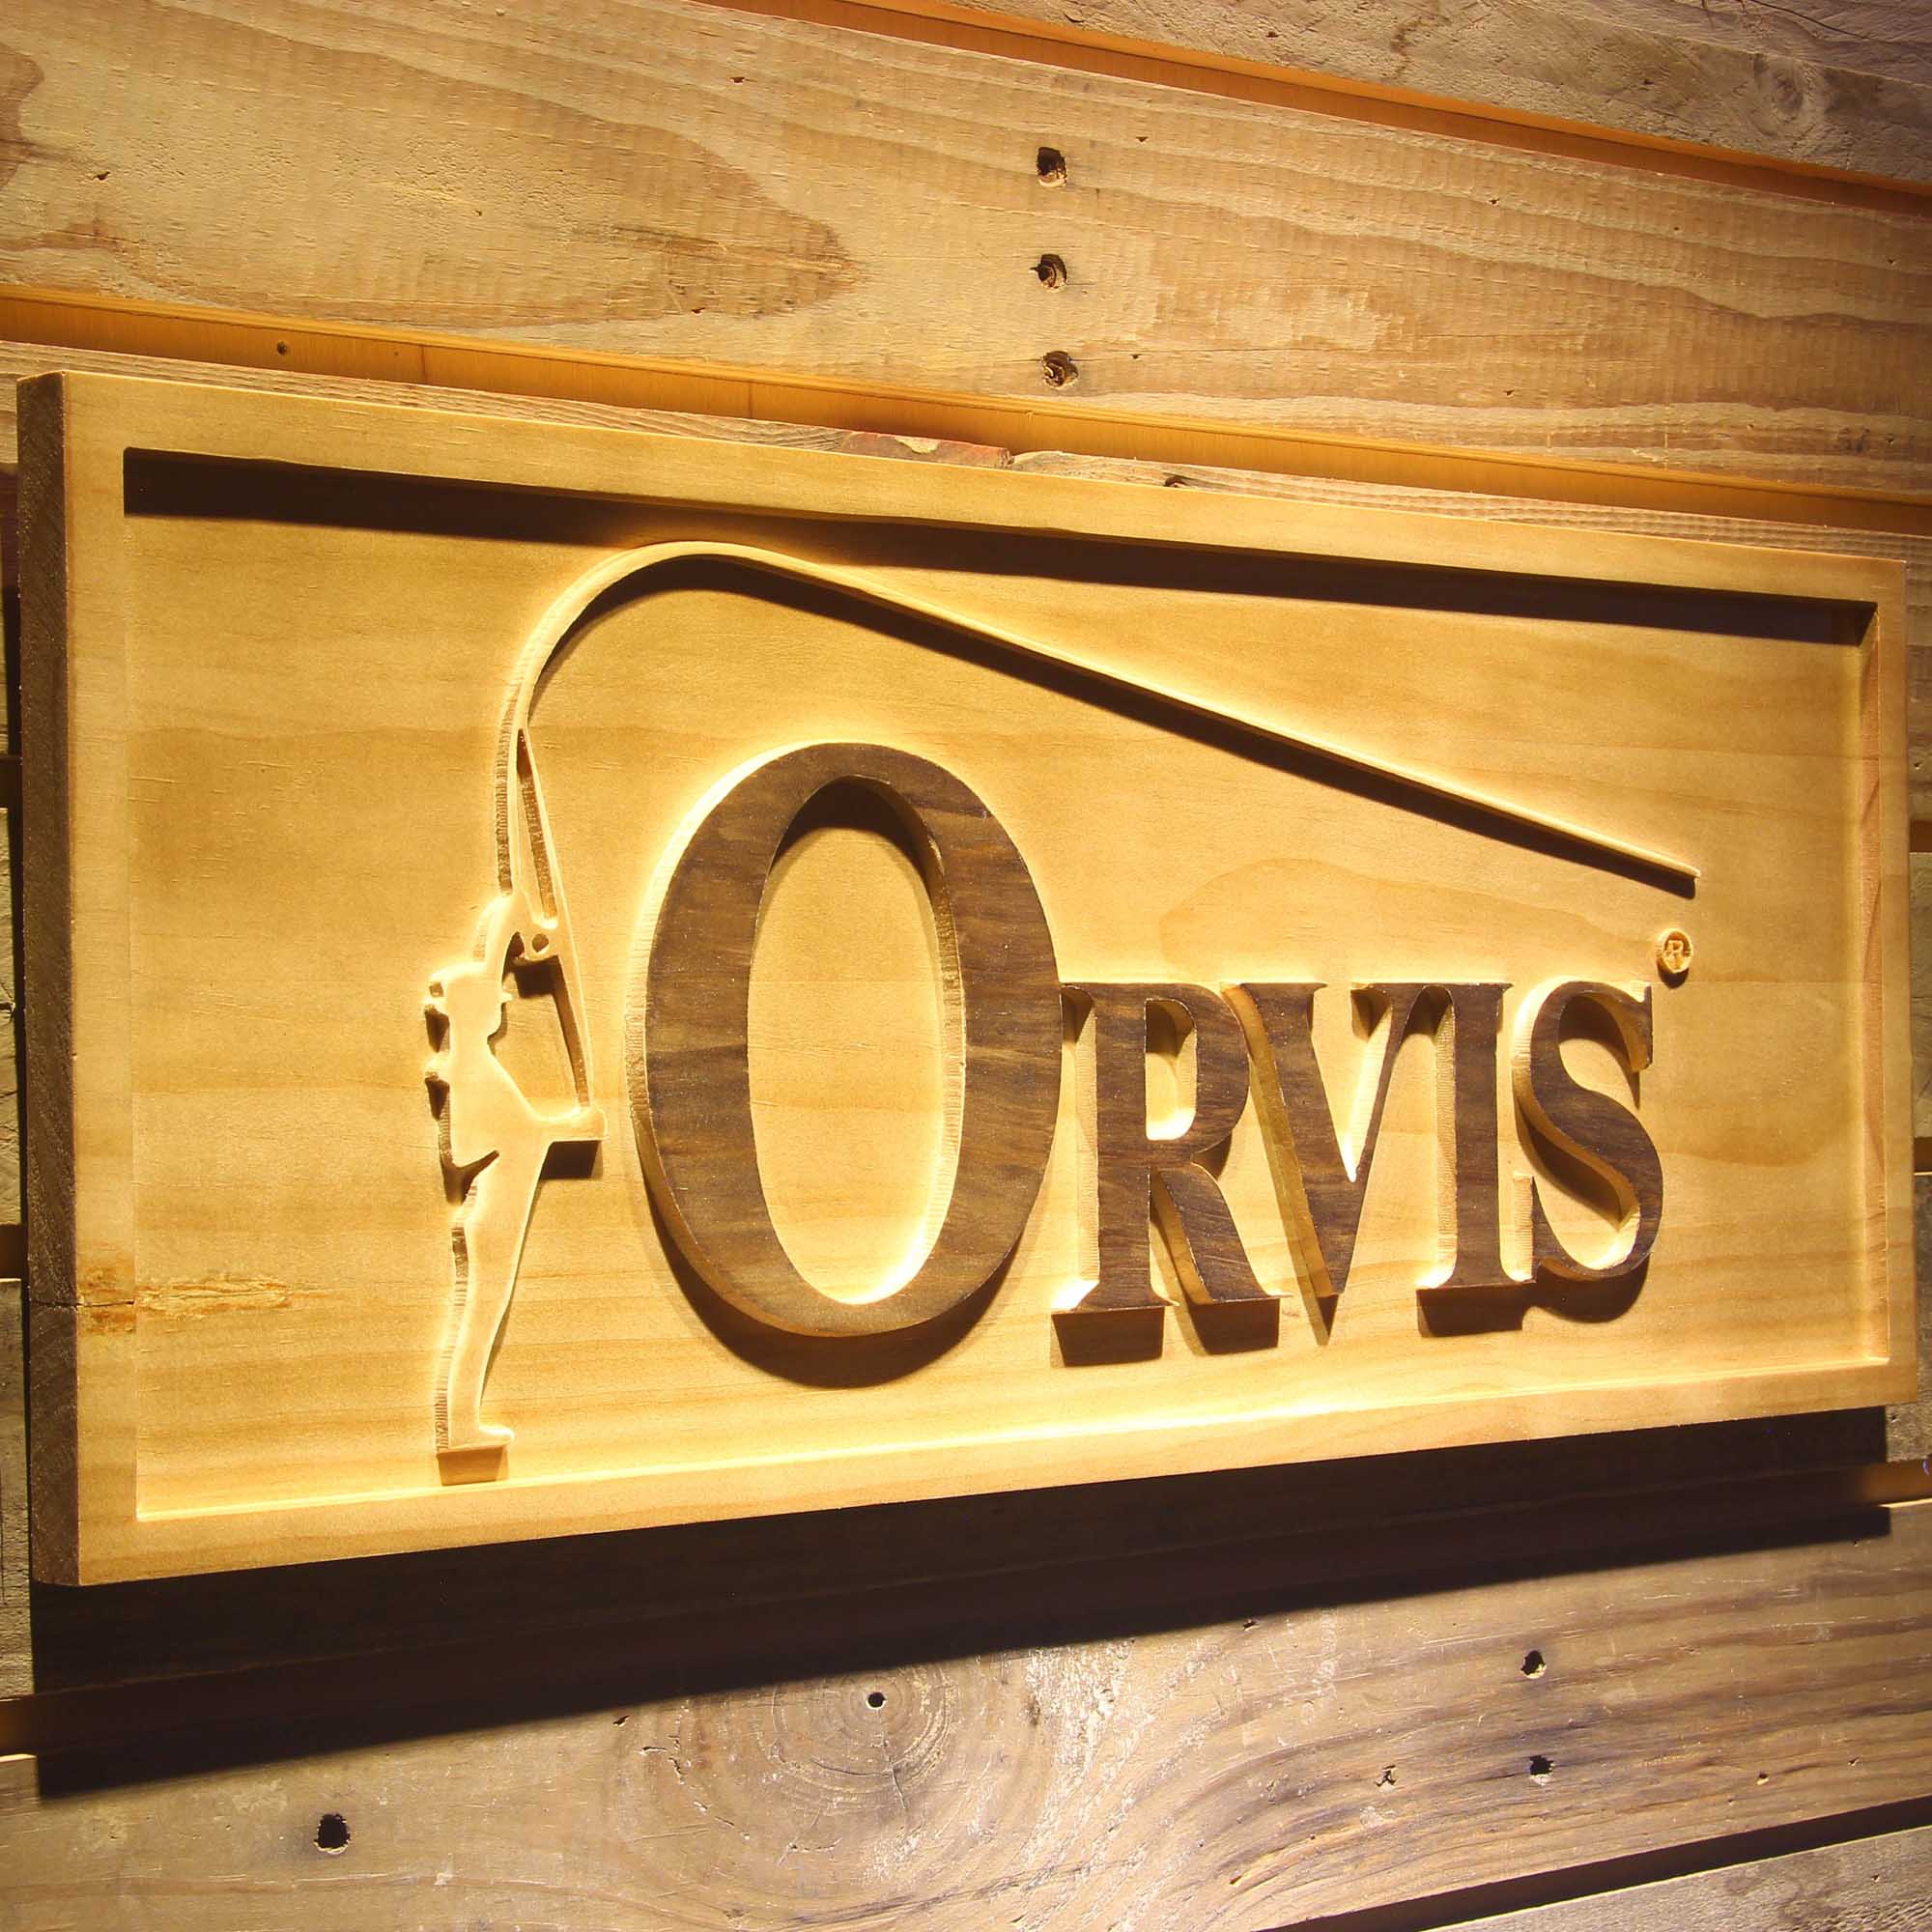 Orvis Fishing 3D Solid Wooden Craving Sign